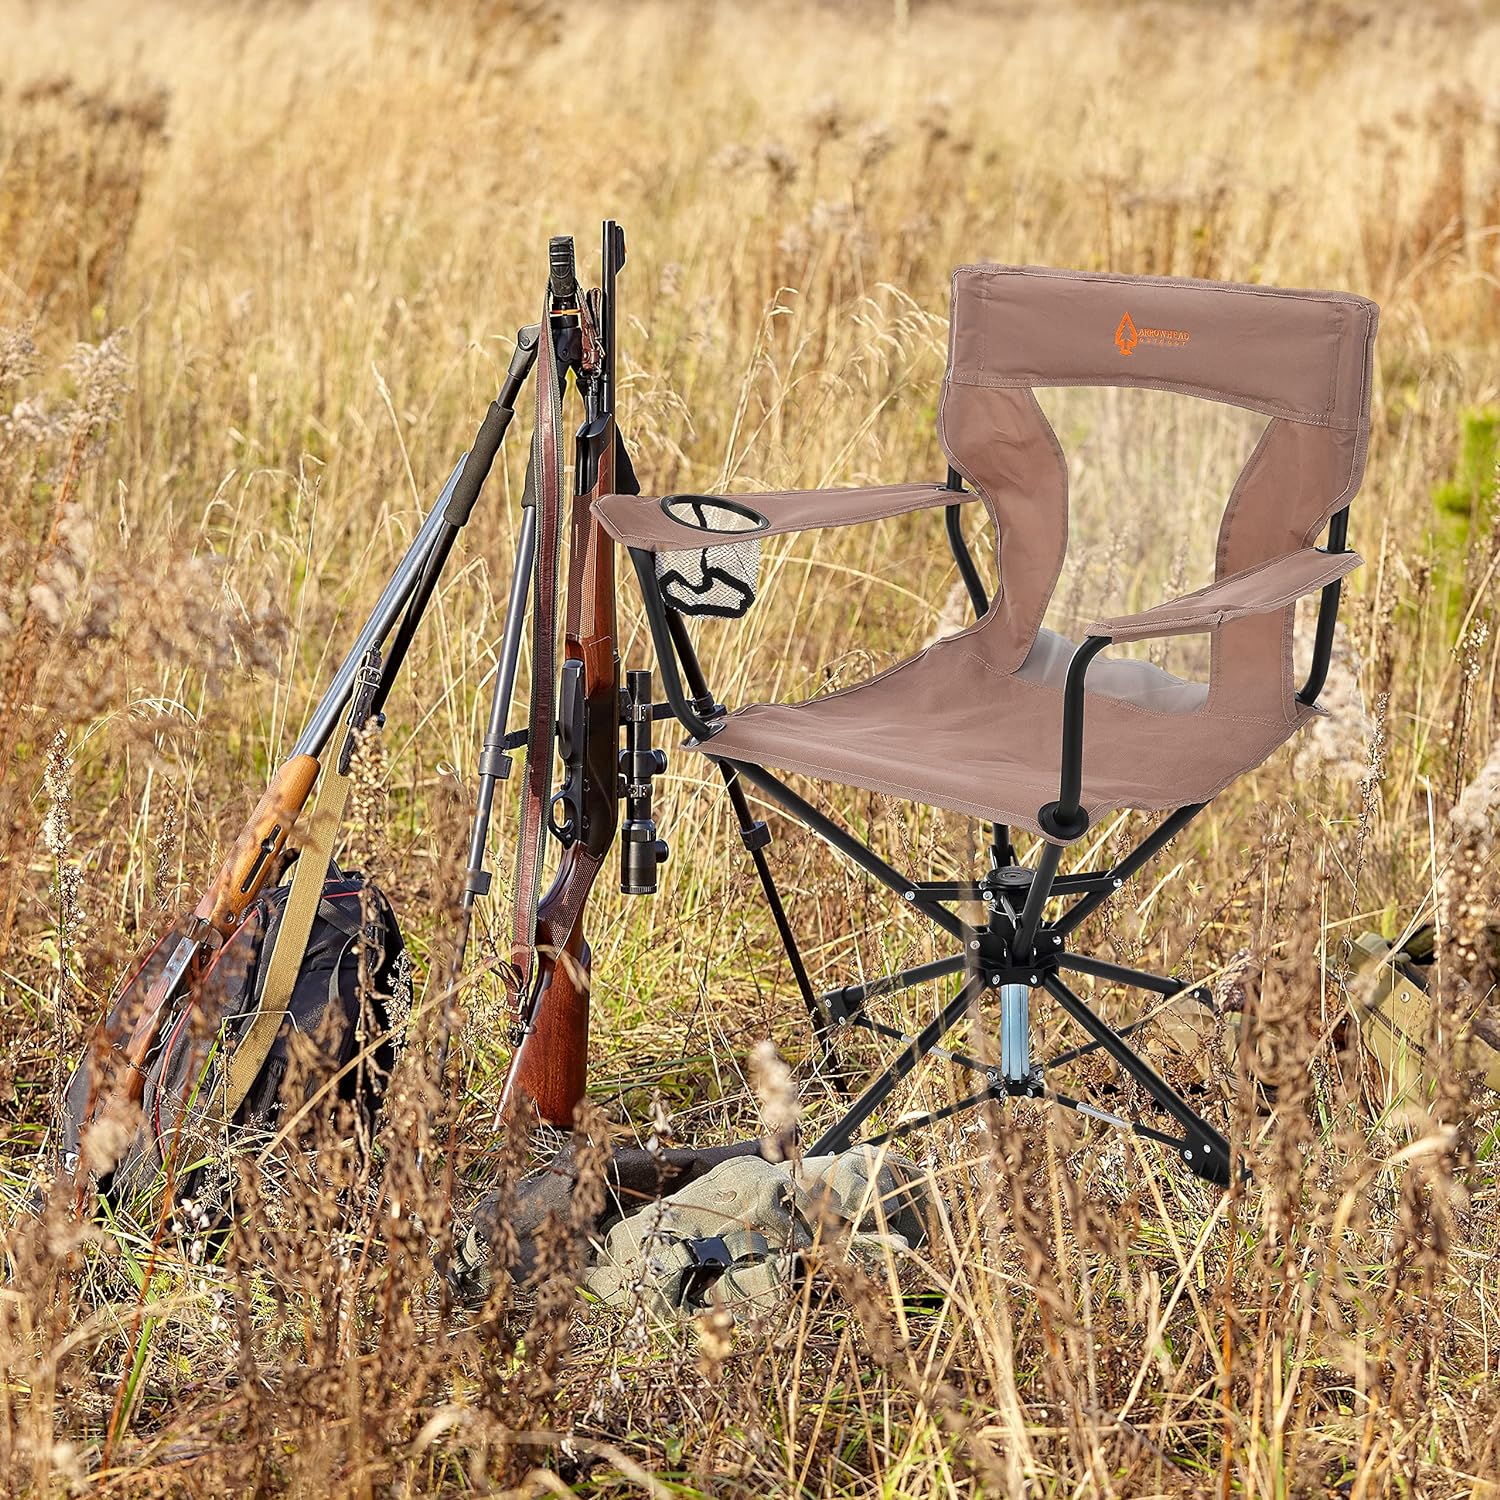 Arrowhead Outdoor 360 Degree Swivel Hunting Chair w/Armrests, Perfect for Blinds, No Sink Feet, Supports Up to 450lbs, Steel Frame, Fishing.